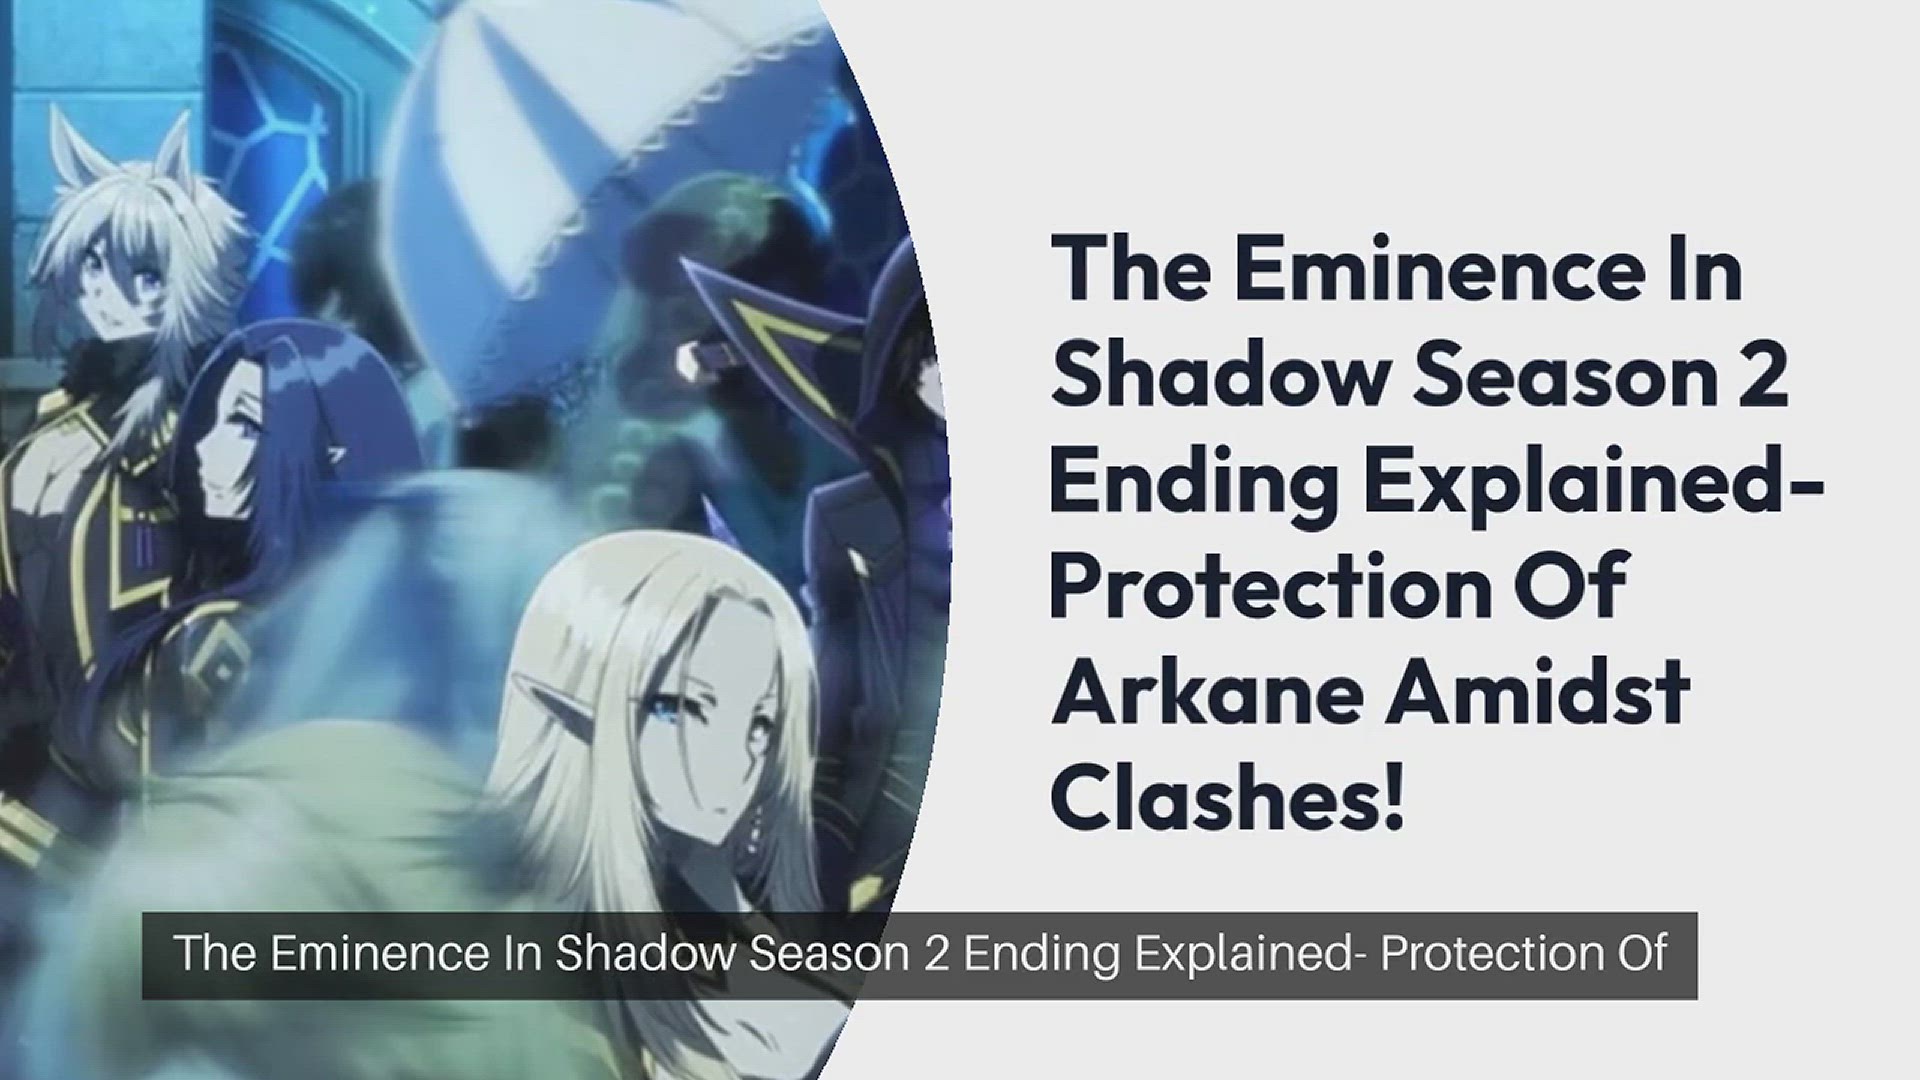 The Eminence in Shadow: Lost Echoes Anime Movie Sequel Announced -  Crunchyroll News